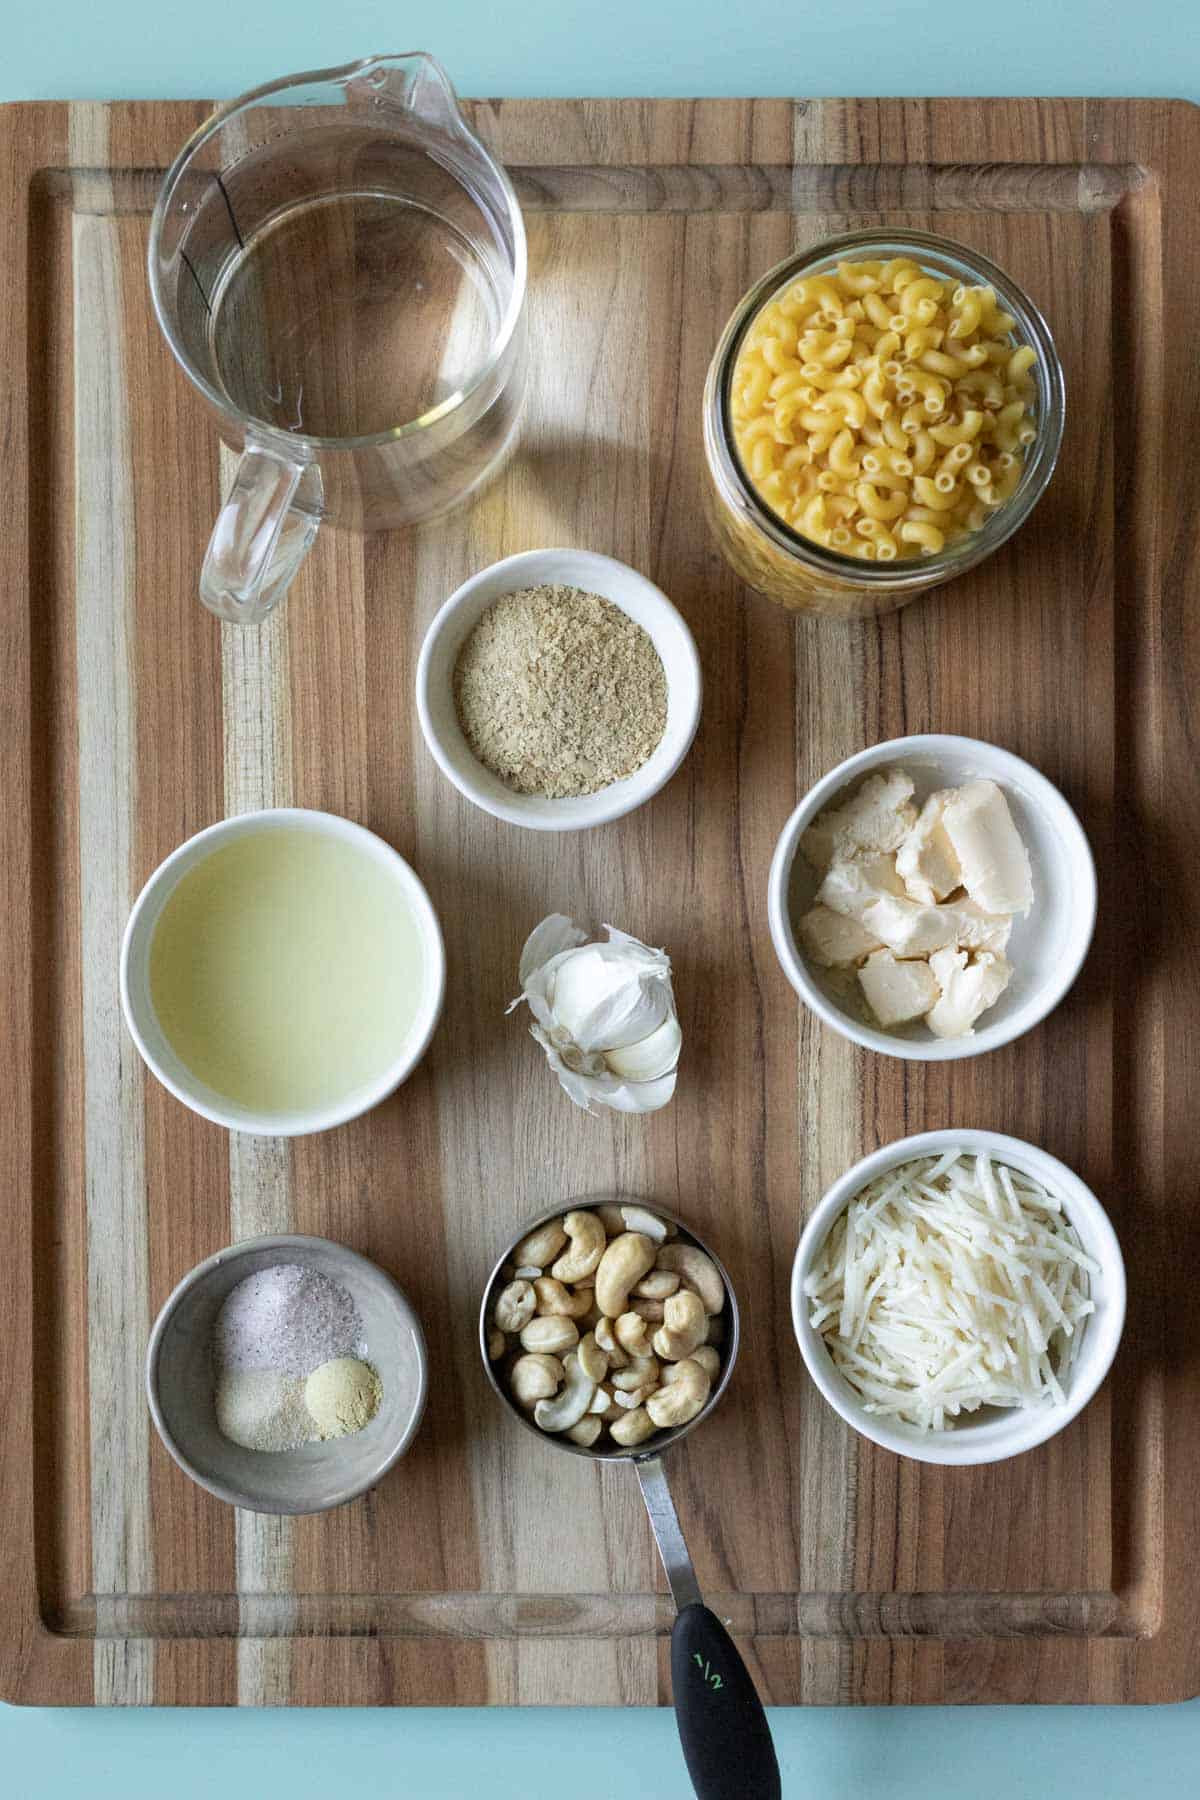 The 9 ingredients needed for vegan Crockpot mac and cheese on a wood cutting board.